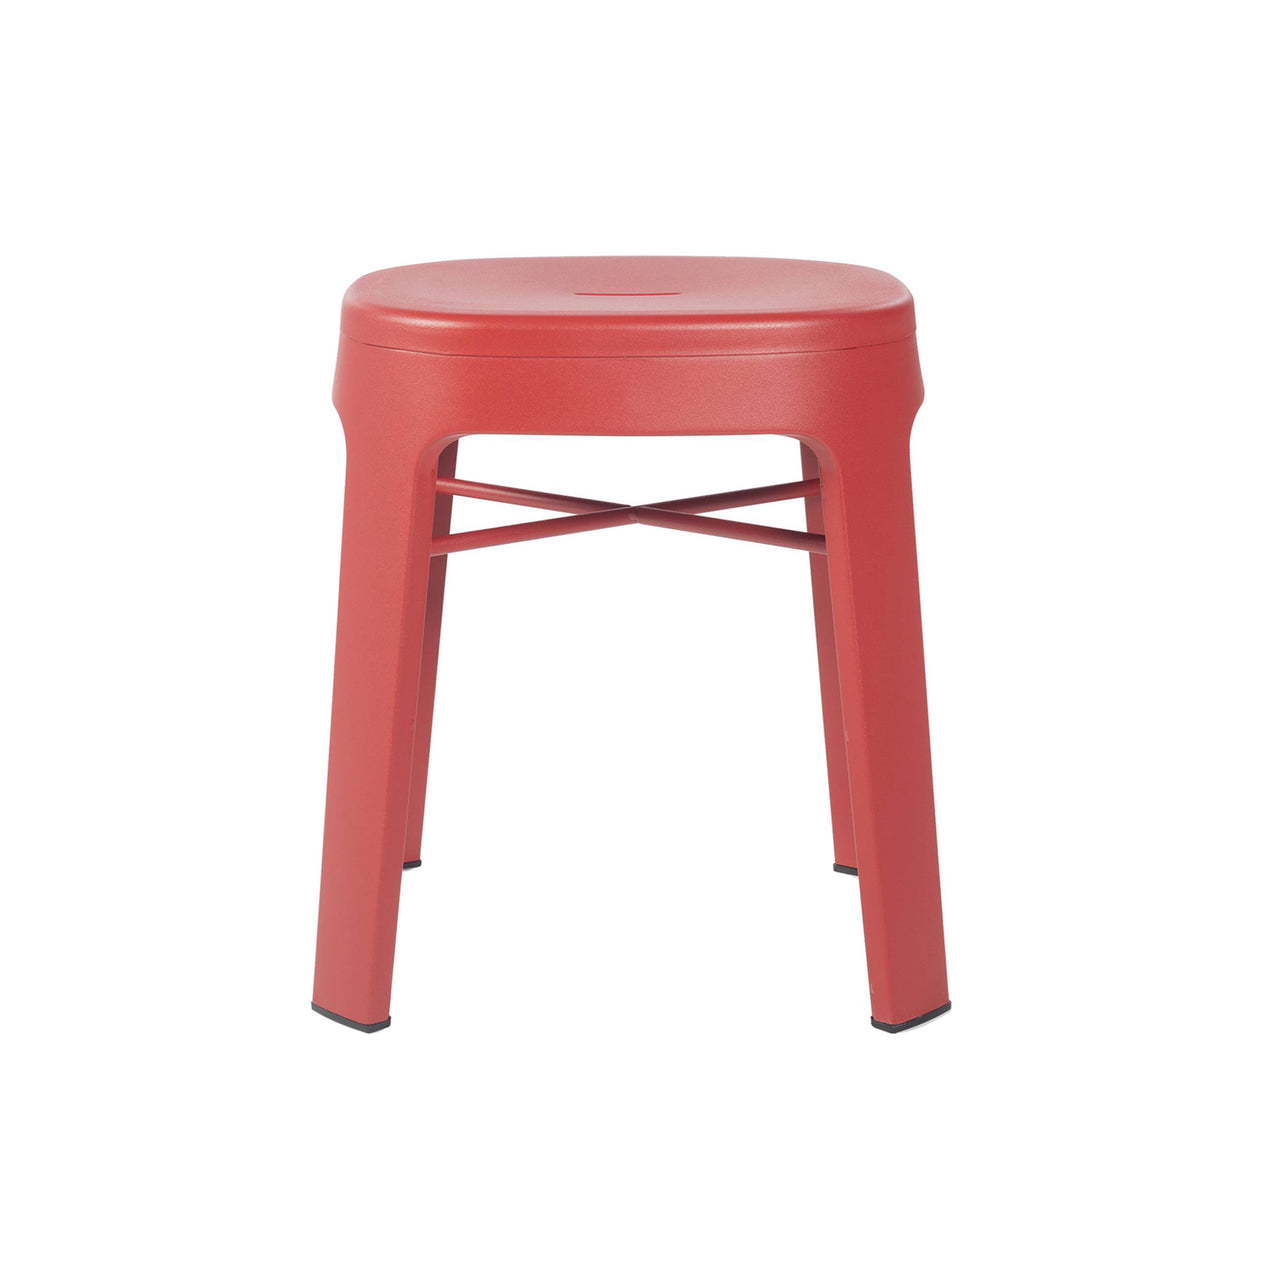 Ombra Stool: Stacking + Red